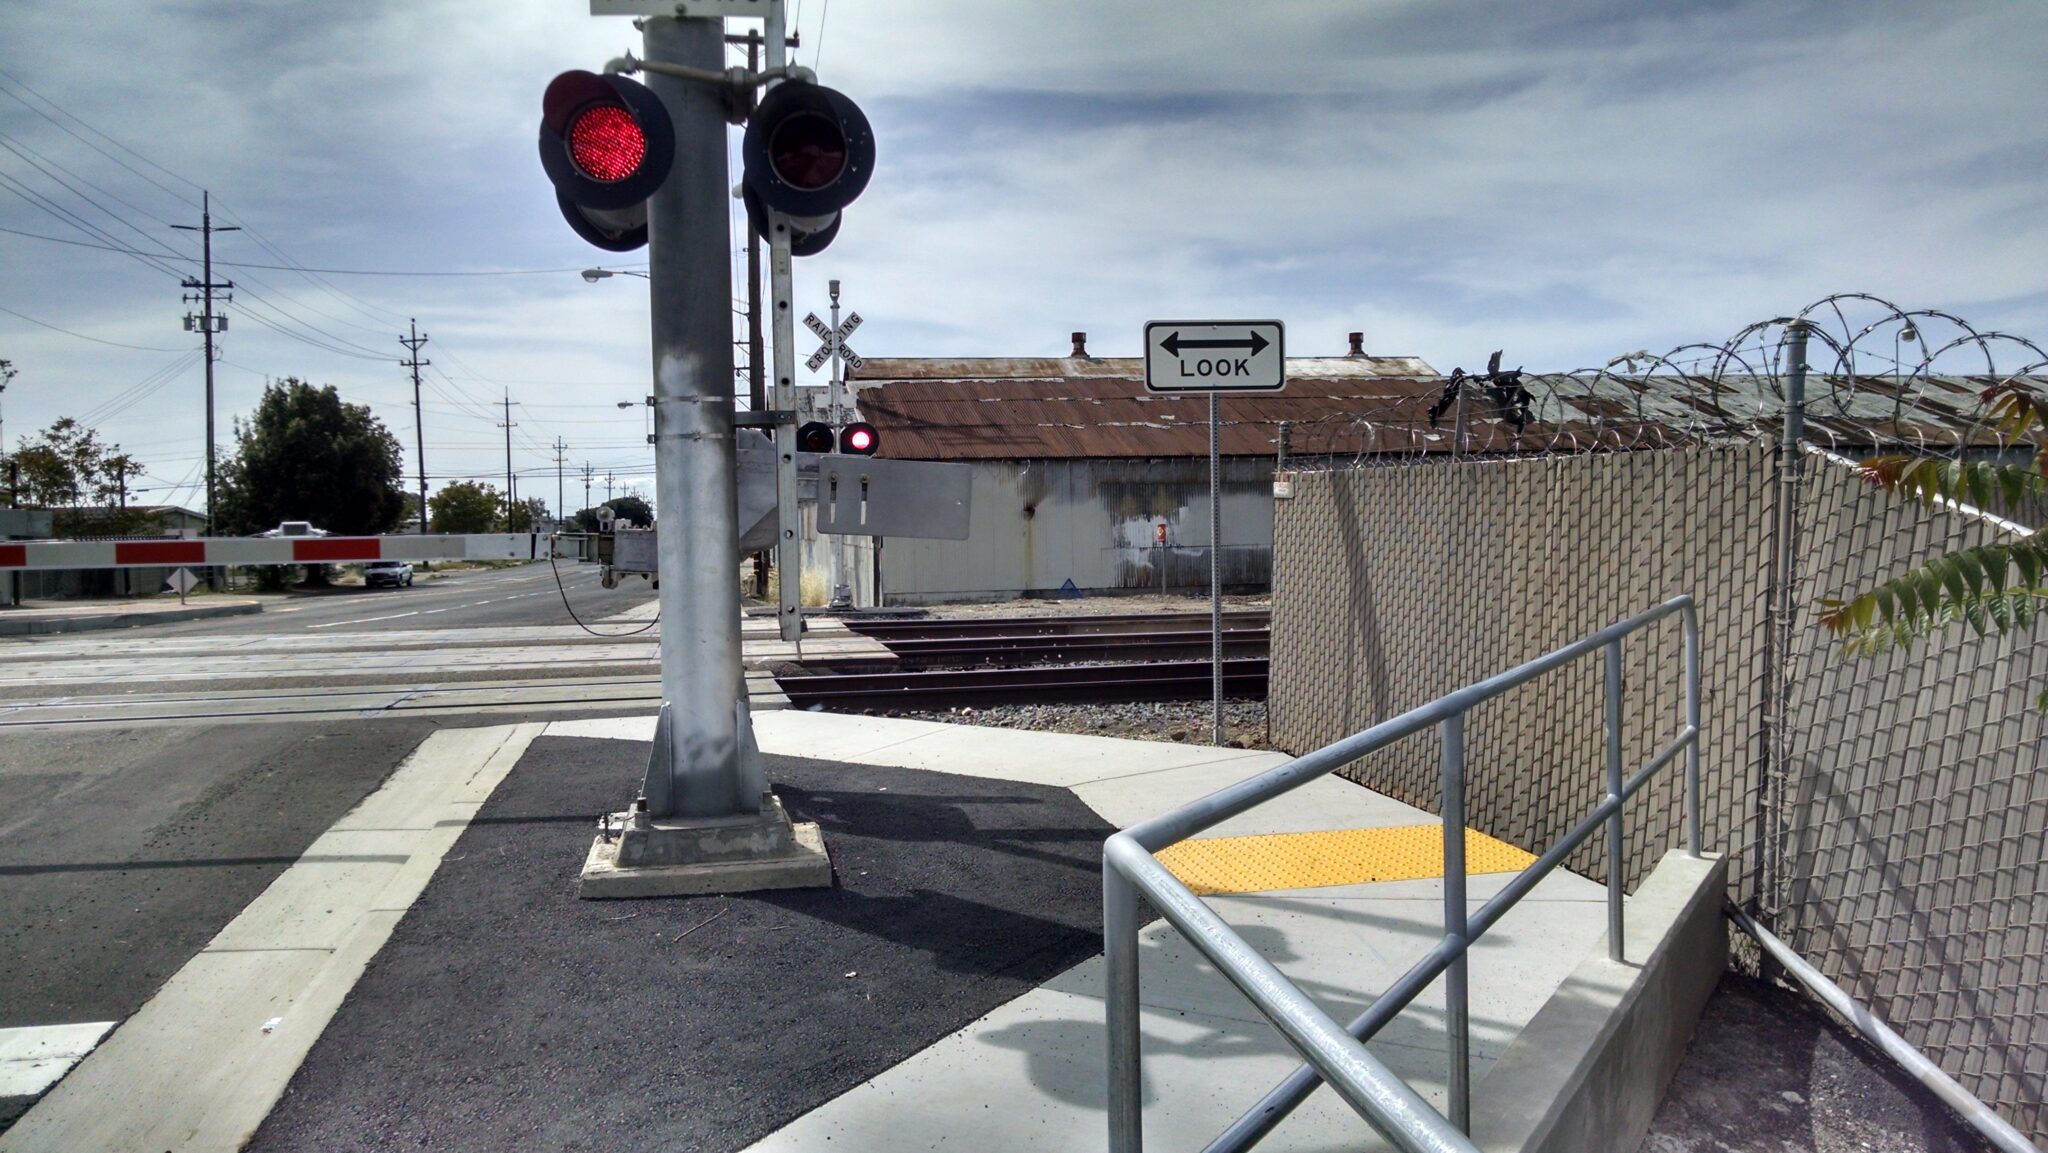 ADA compliant railway crossing. Active railroad crossing guard with lights in front of train tracks.